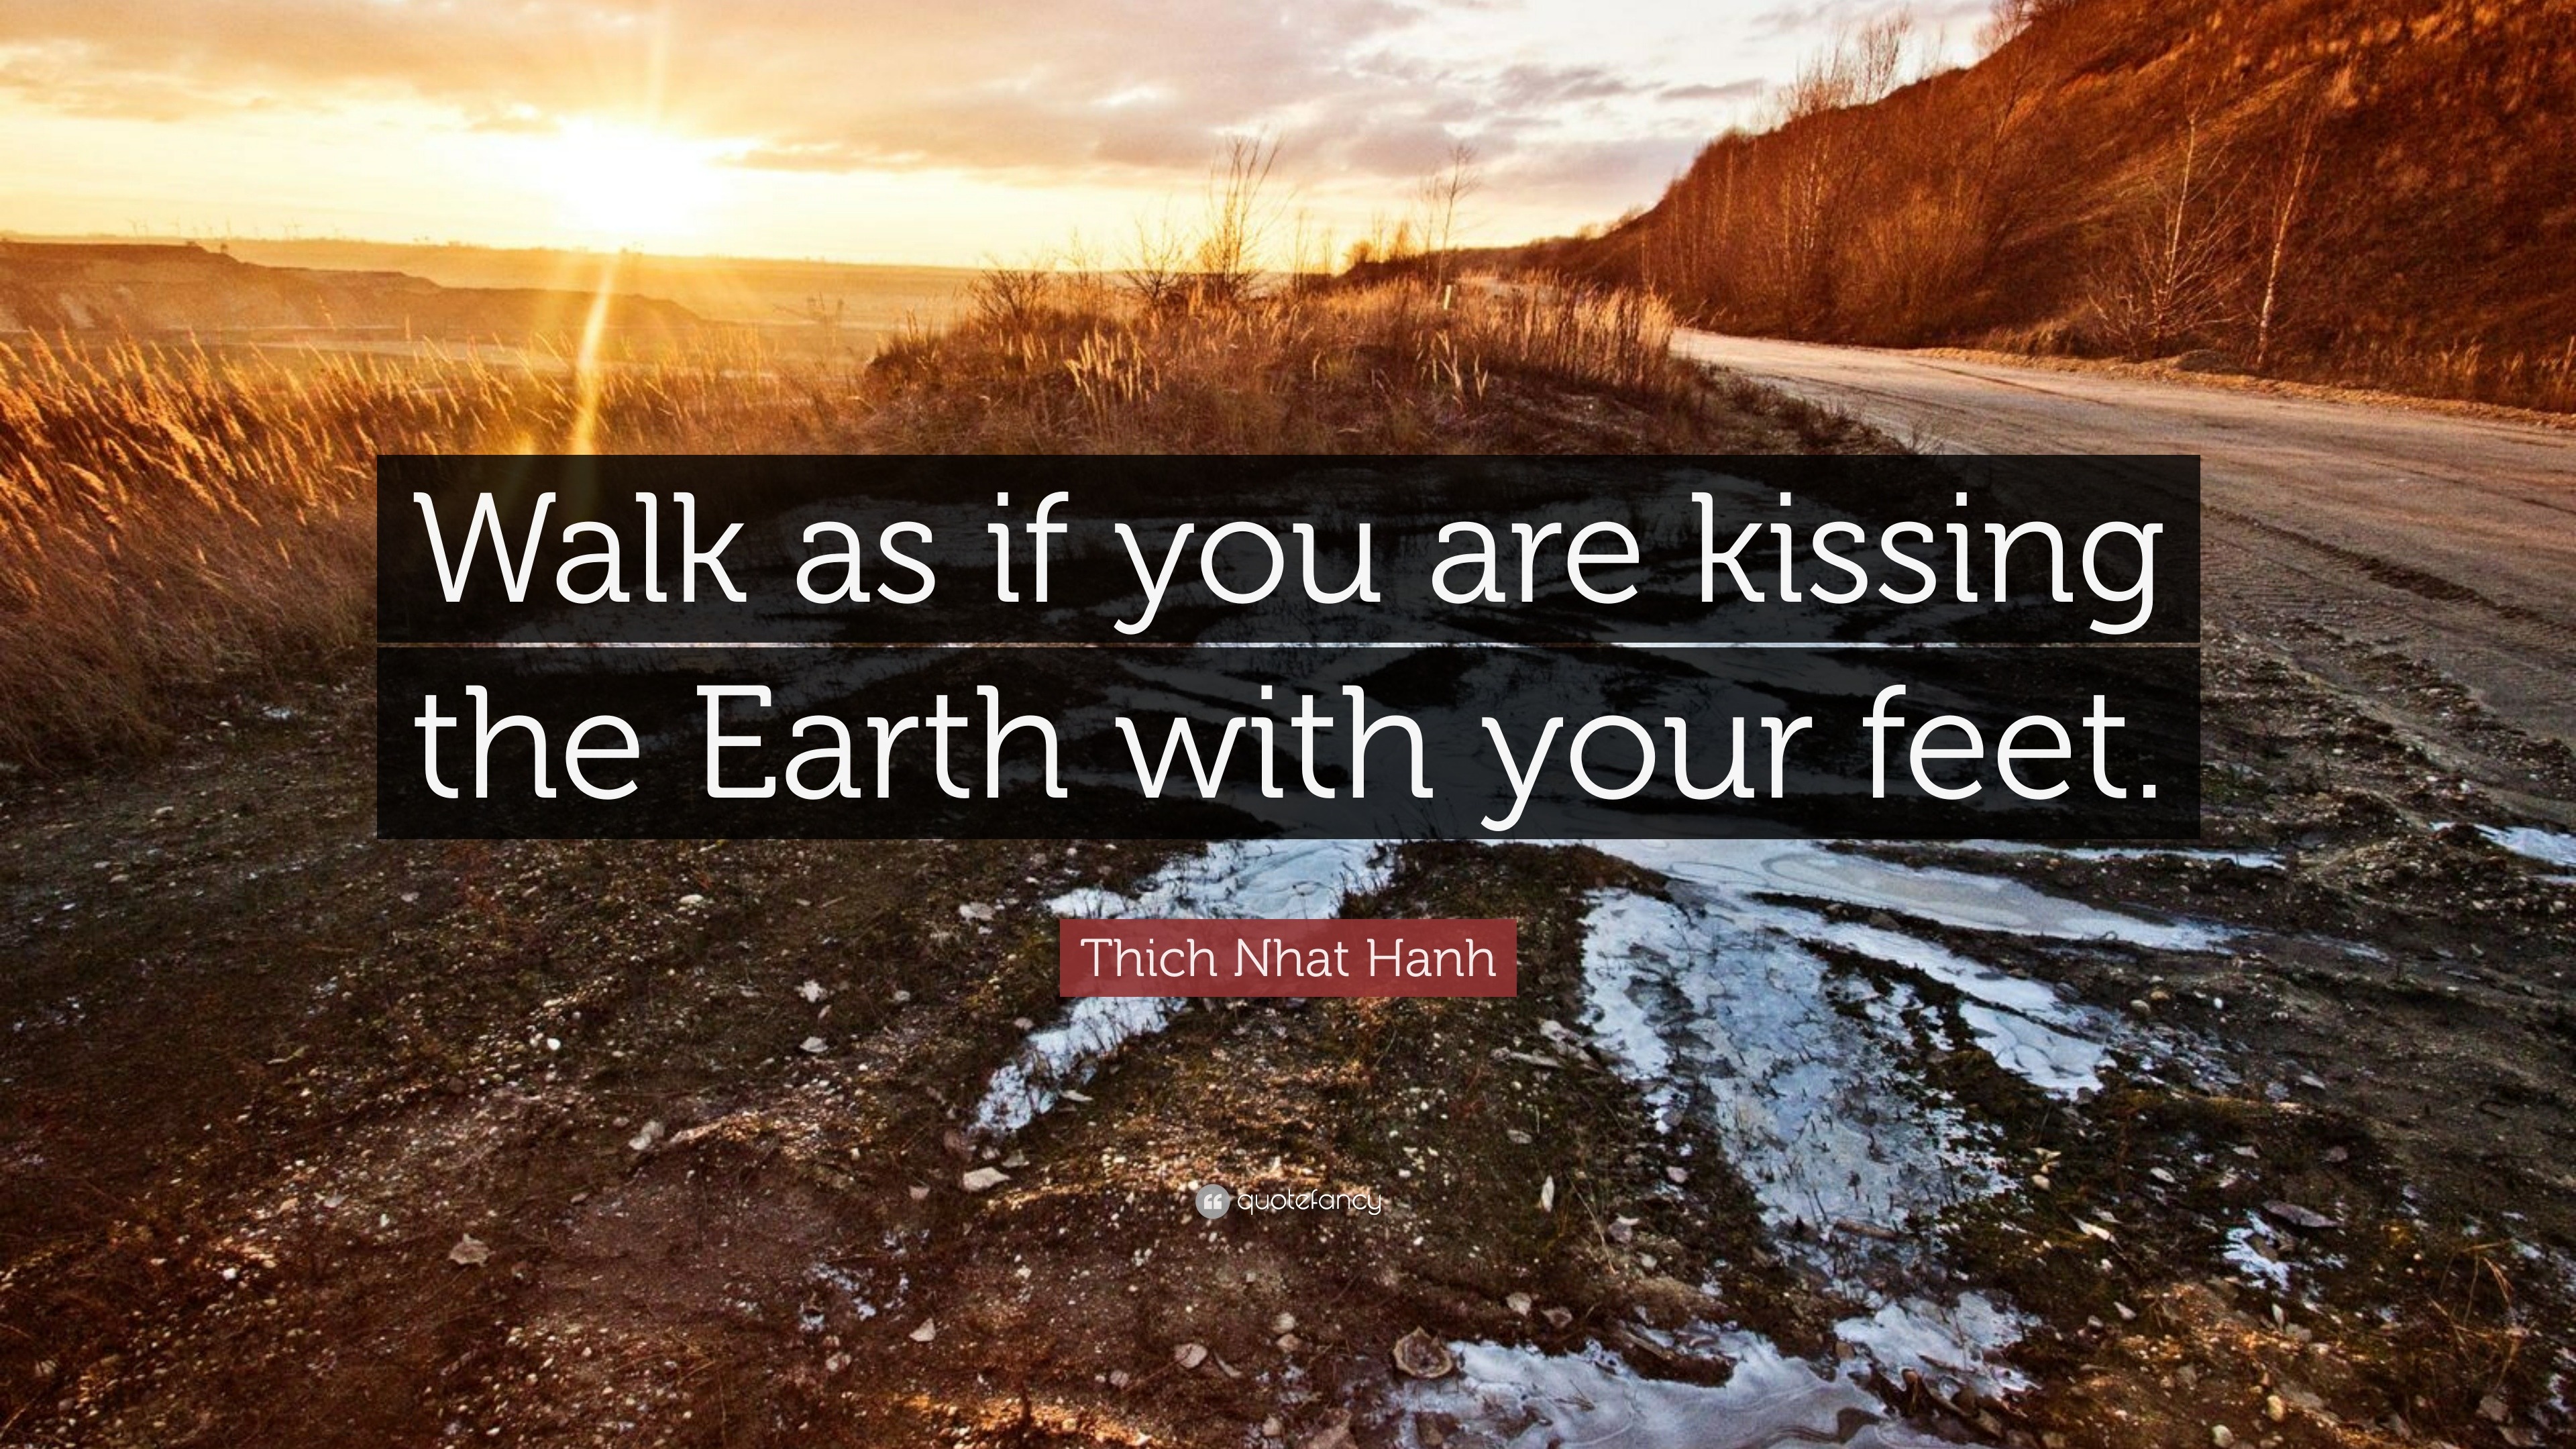 Thich Nhat Hanh Quotes (60 wallpapers) - Quotefancy